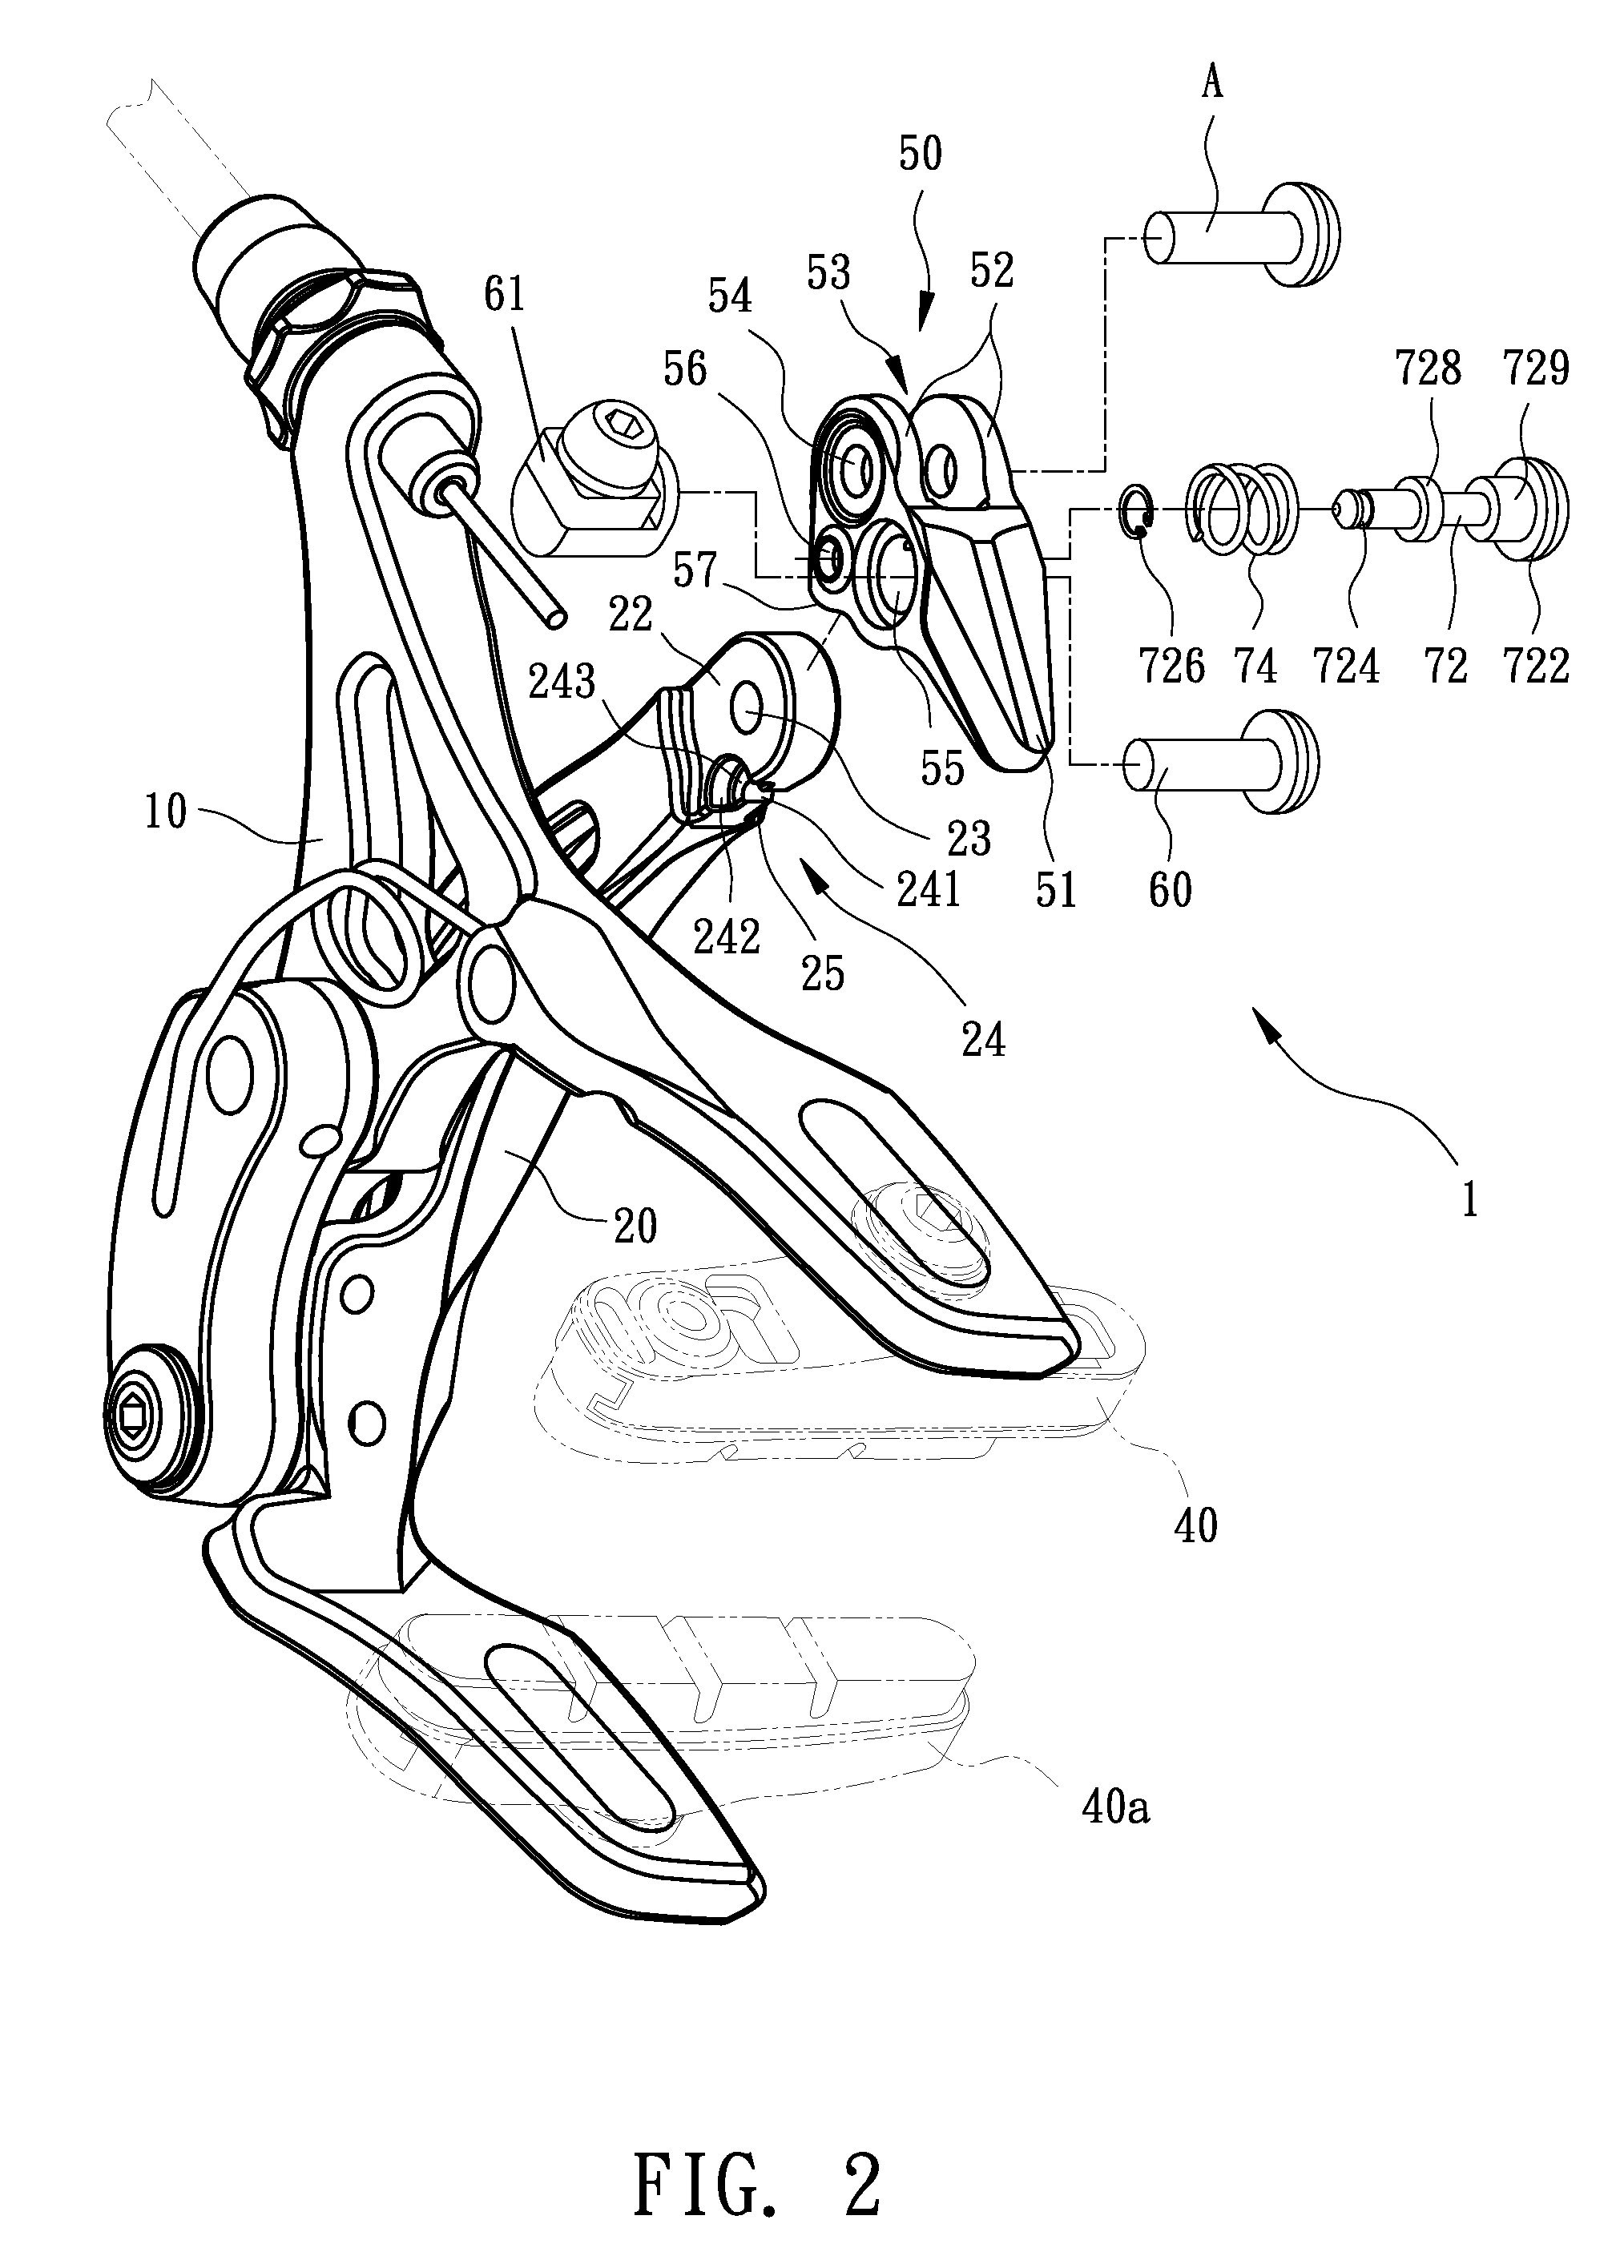 Mechanism for quickly loosening and tightening brake cable in caliper brake of bicycle